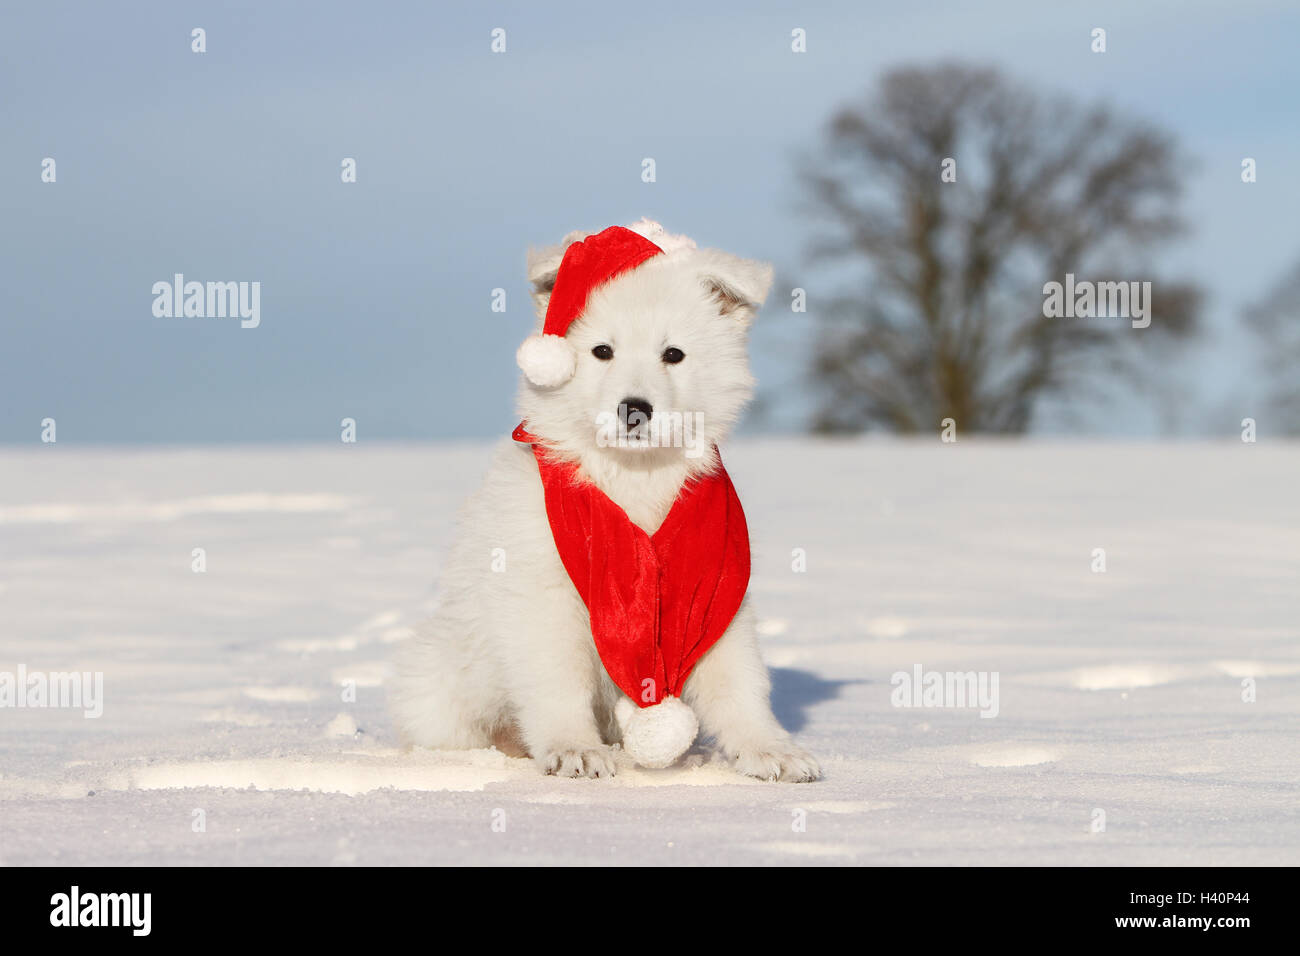 White Swiss Shepherd Dog / Berger blanc suisse puppy in Christmas hat sitting in snow Stock Photo